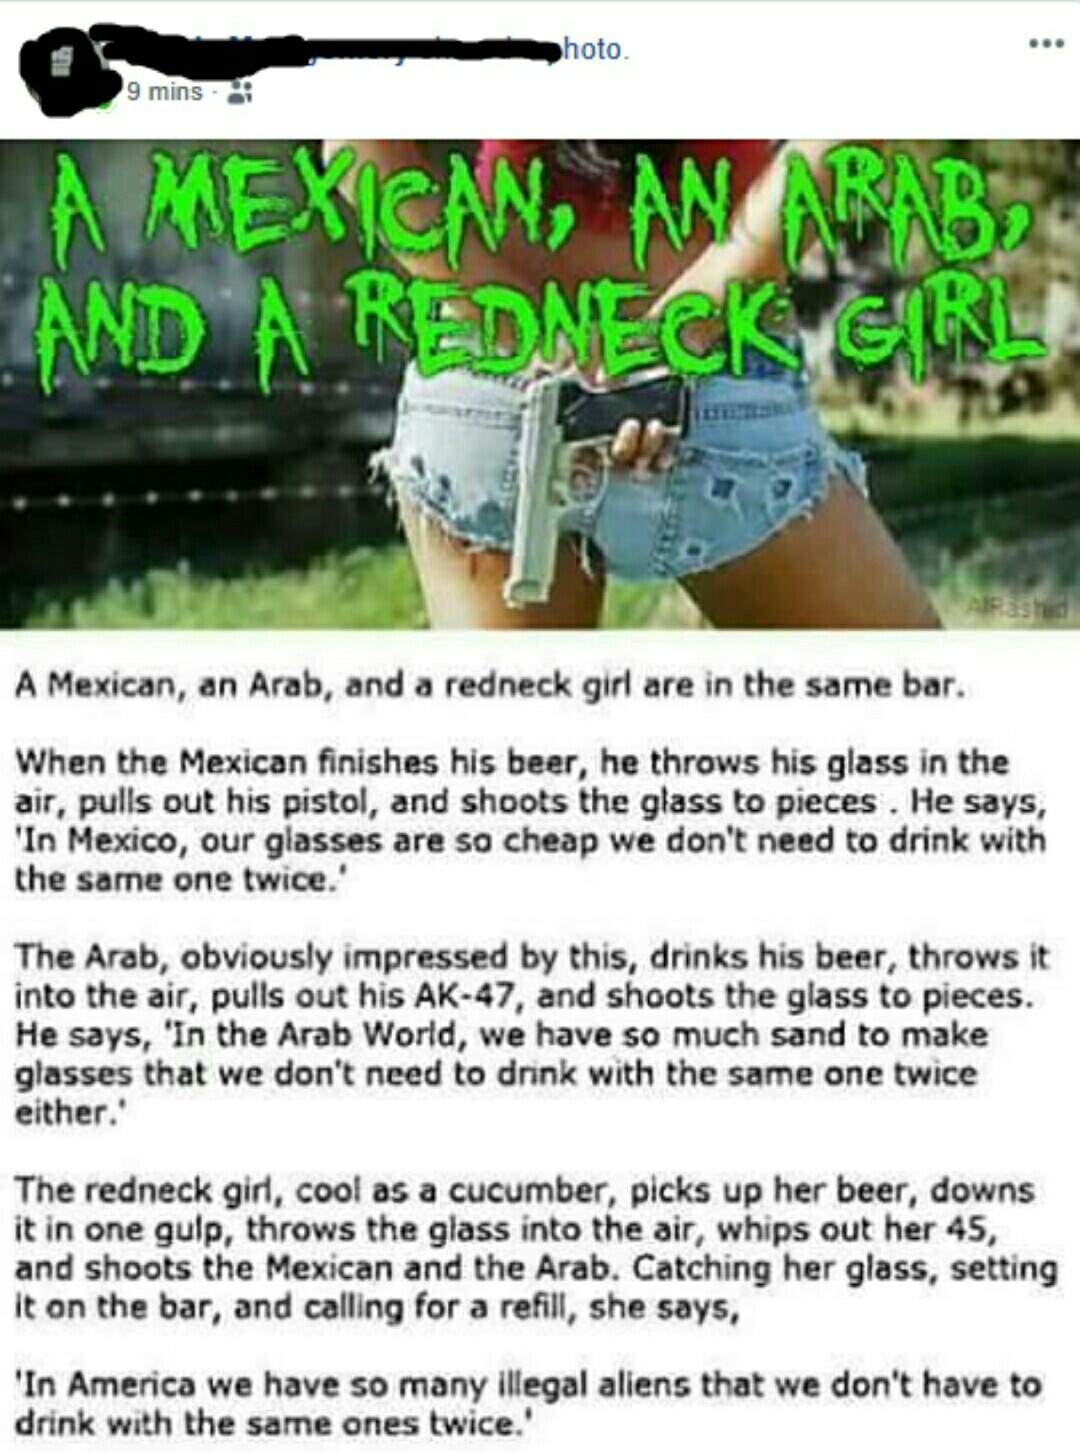 Mexican, Arab and redneck girl. - Reddit, Humor, The americans